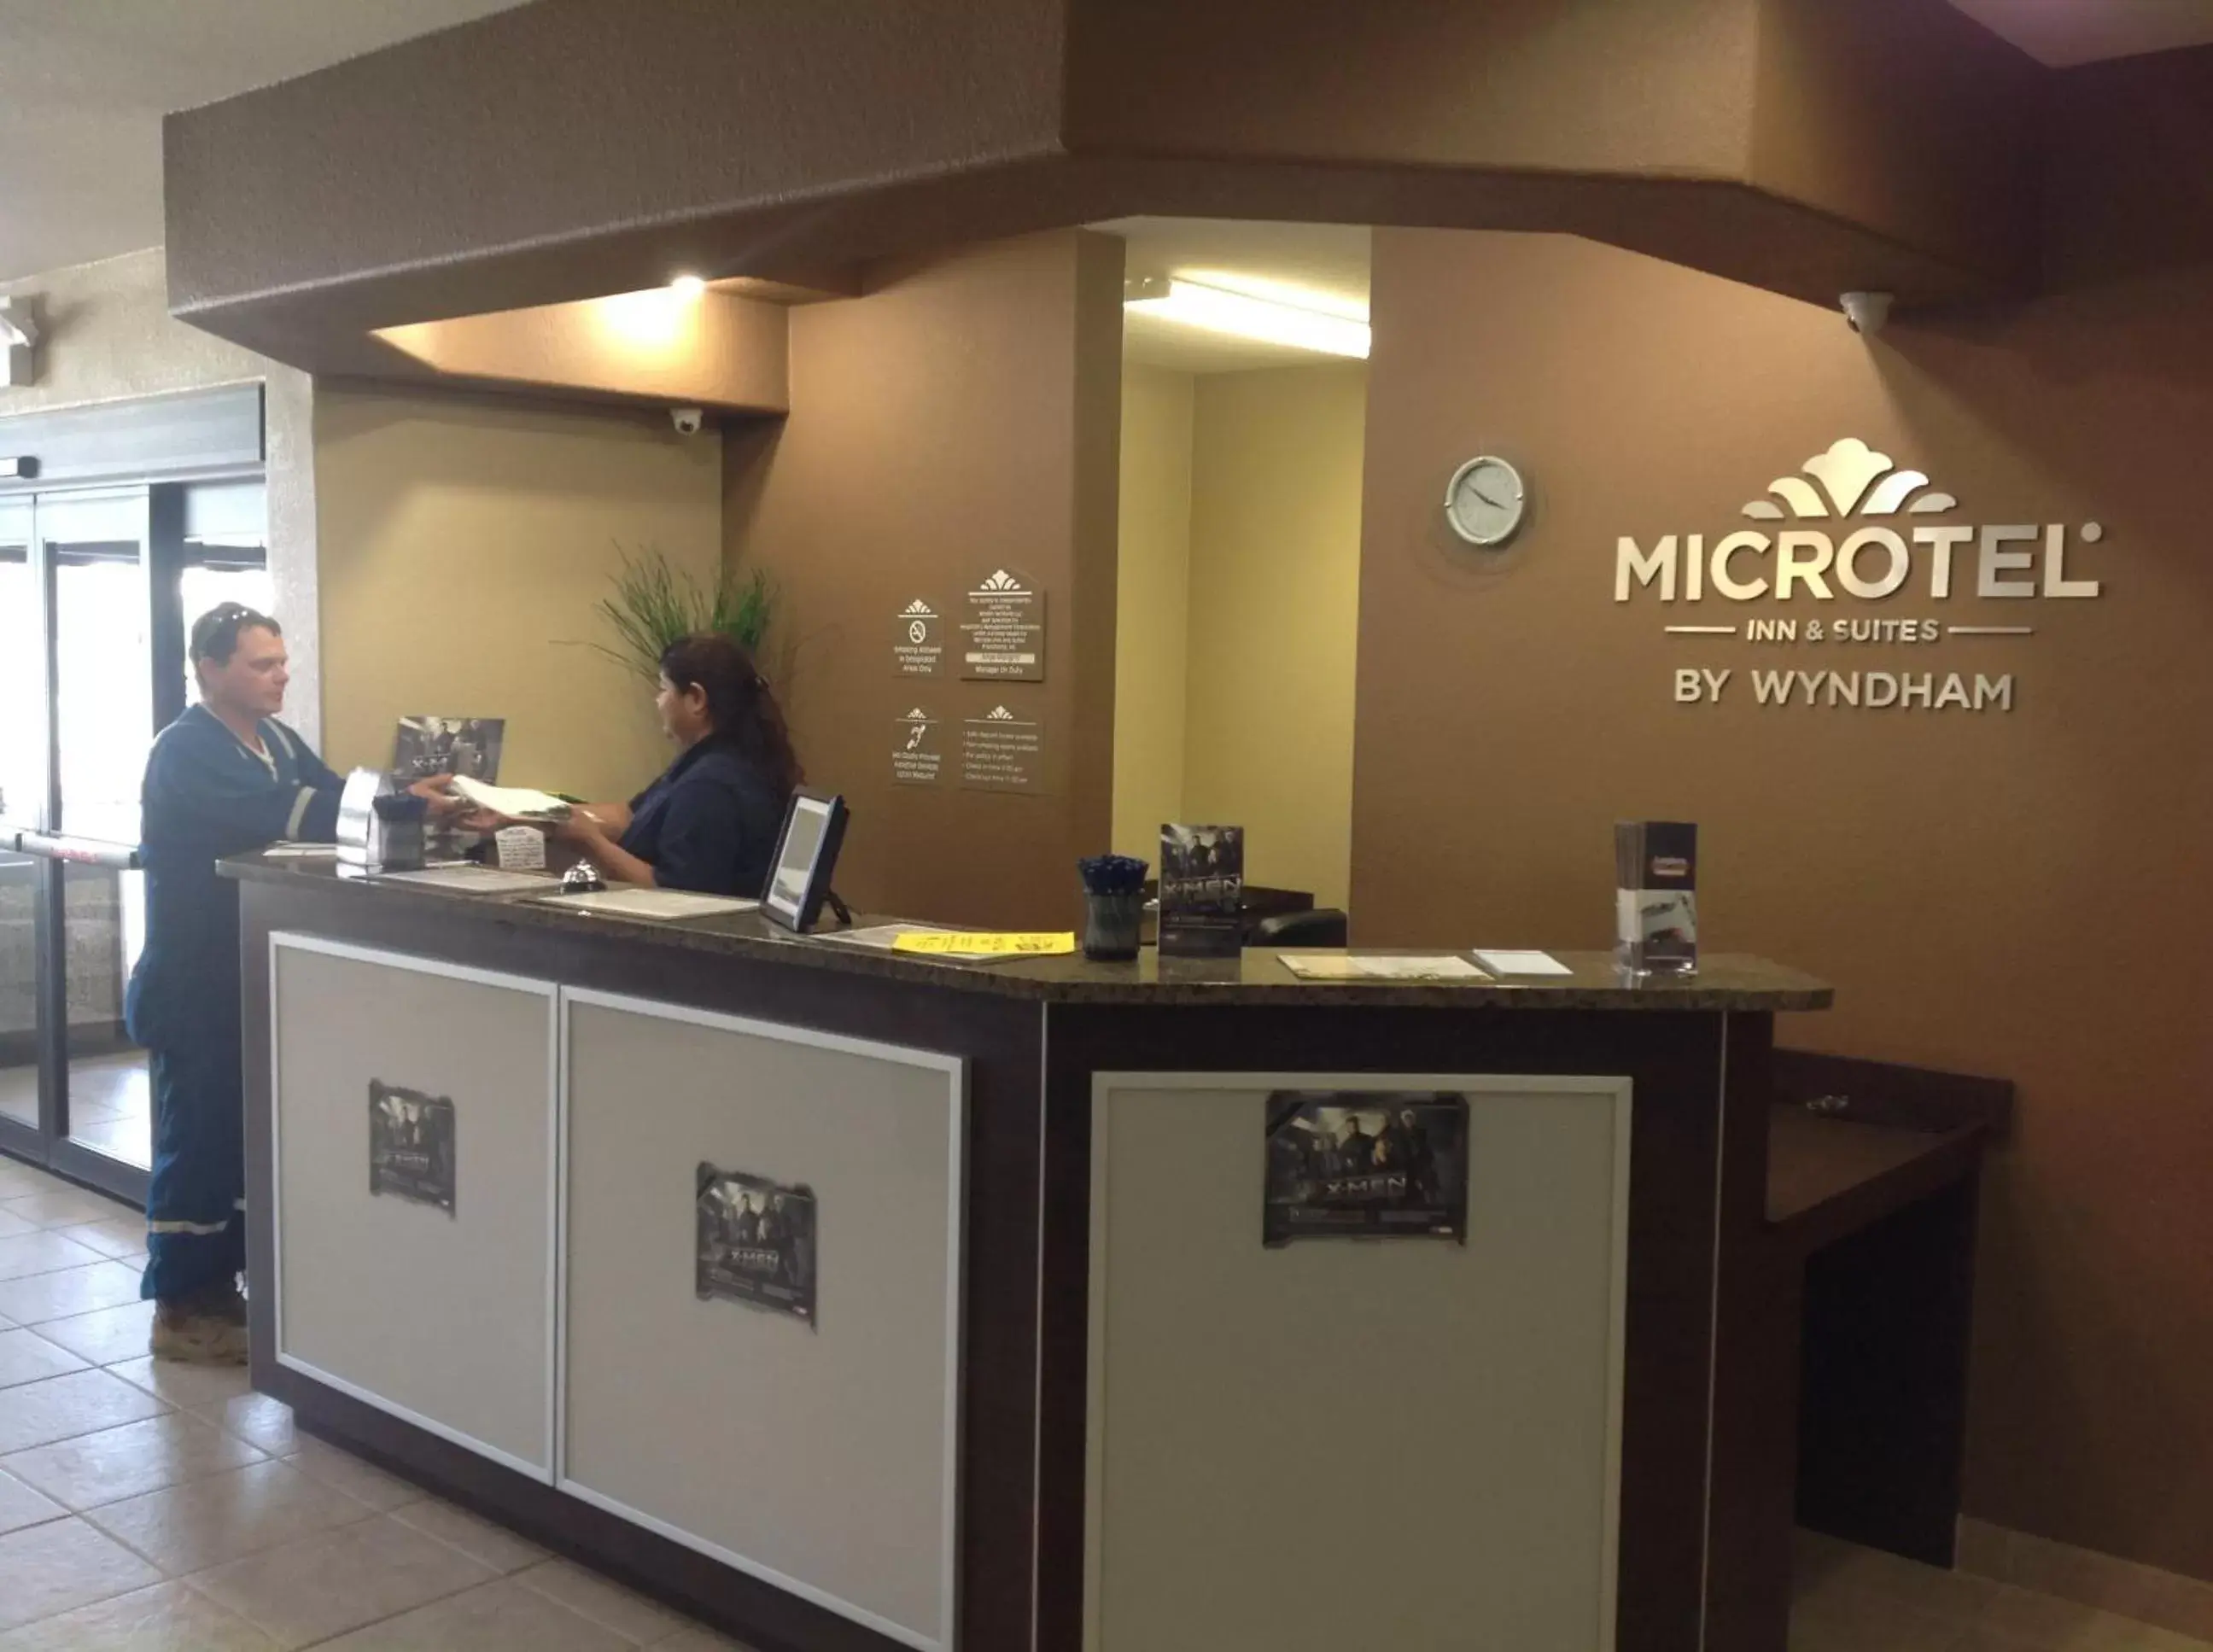 Staff, Lobby/Reception in Microtel Inn & Suites Gonzales TX